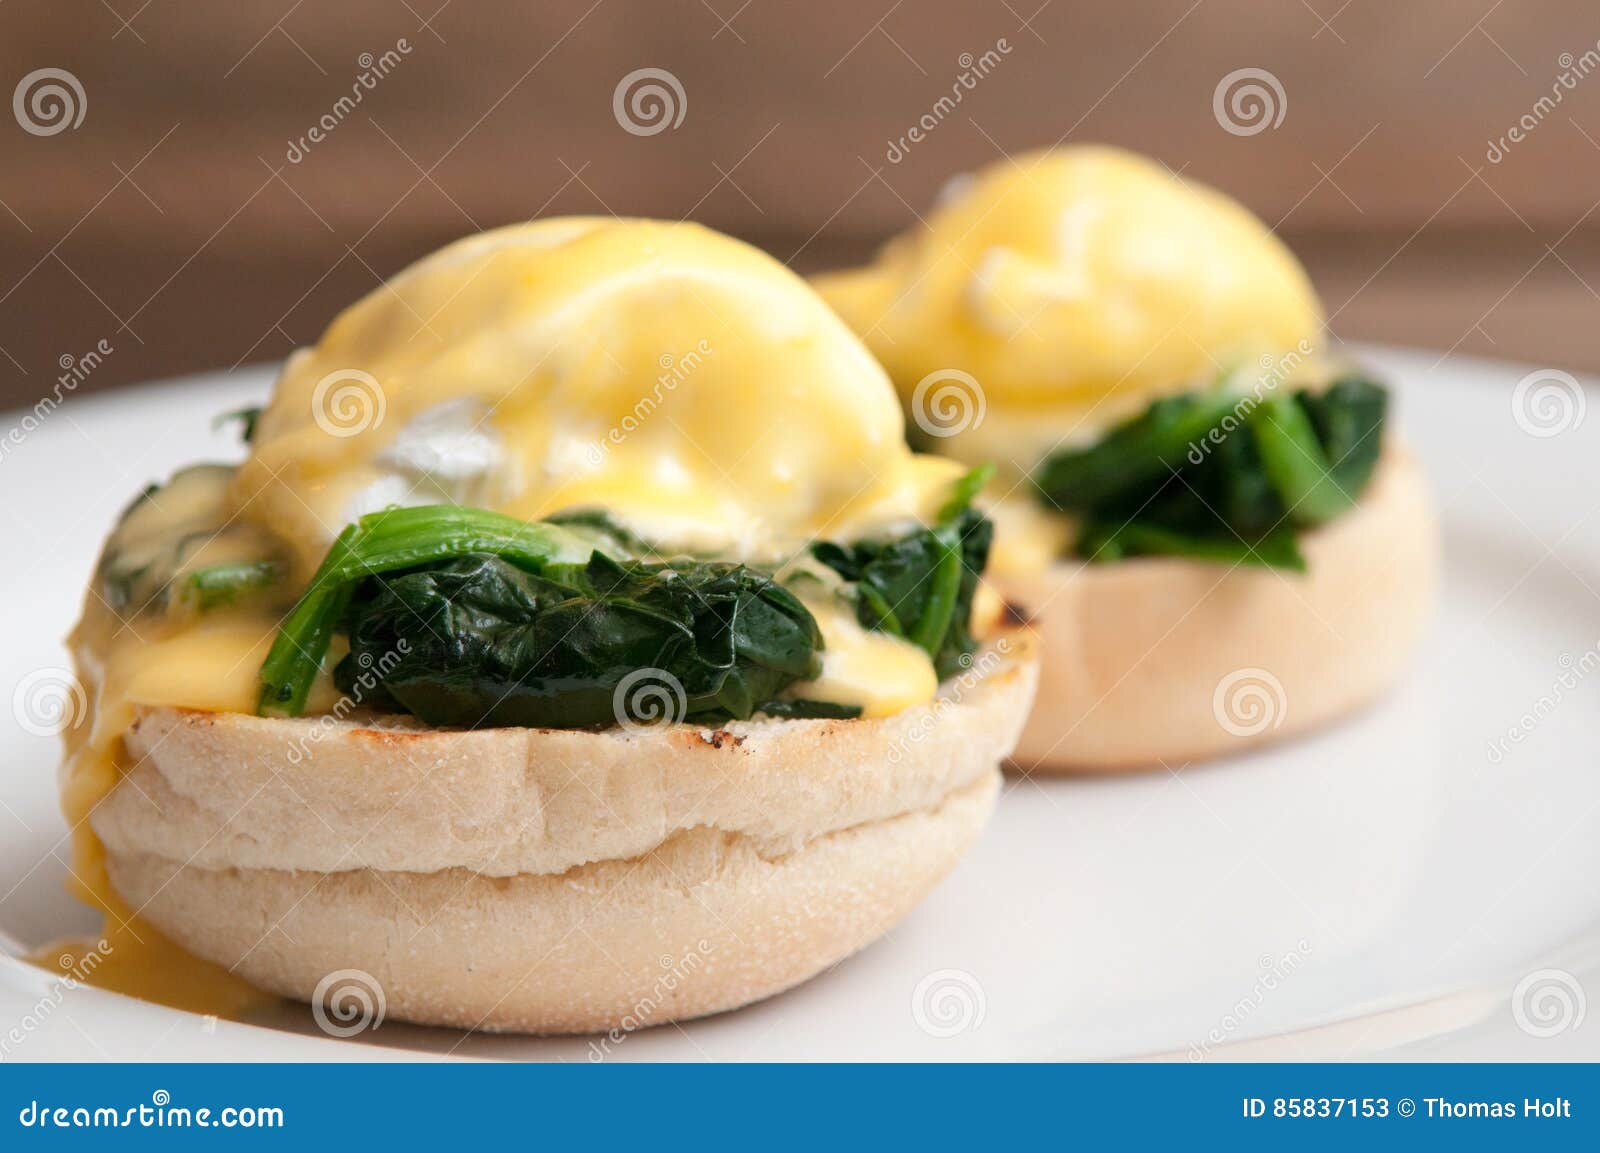 eggs benedict or eggs florentine on a white plate in the cafe